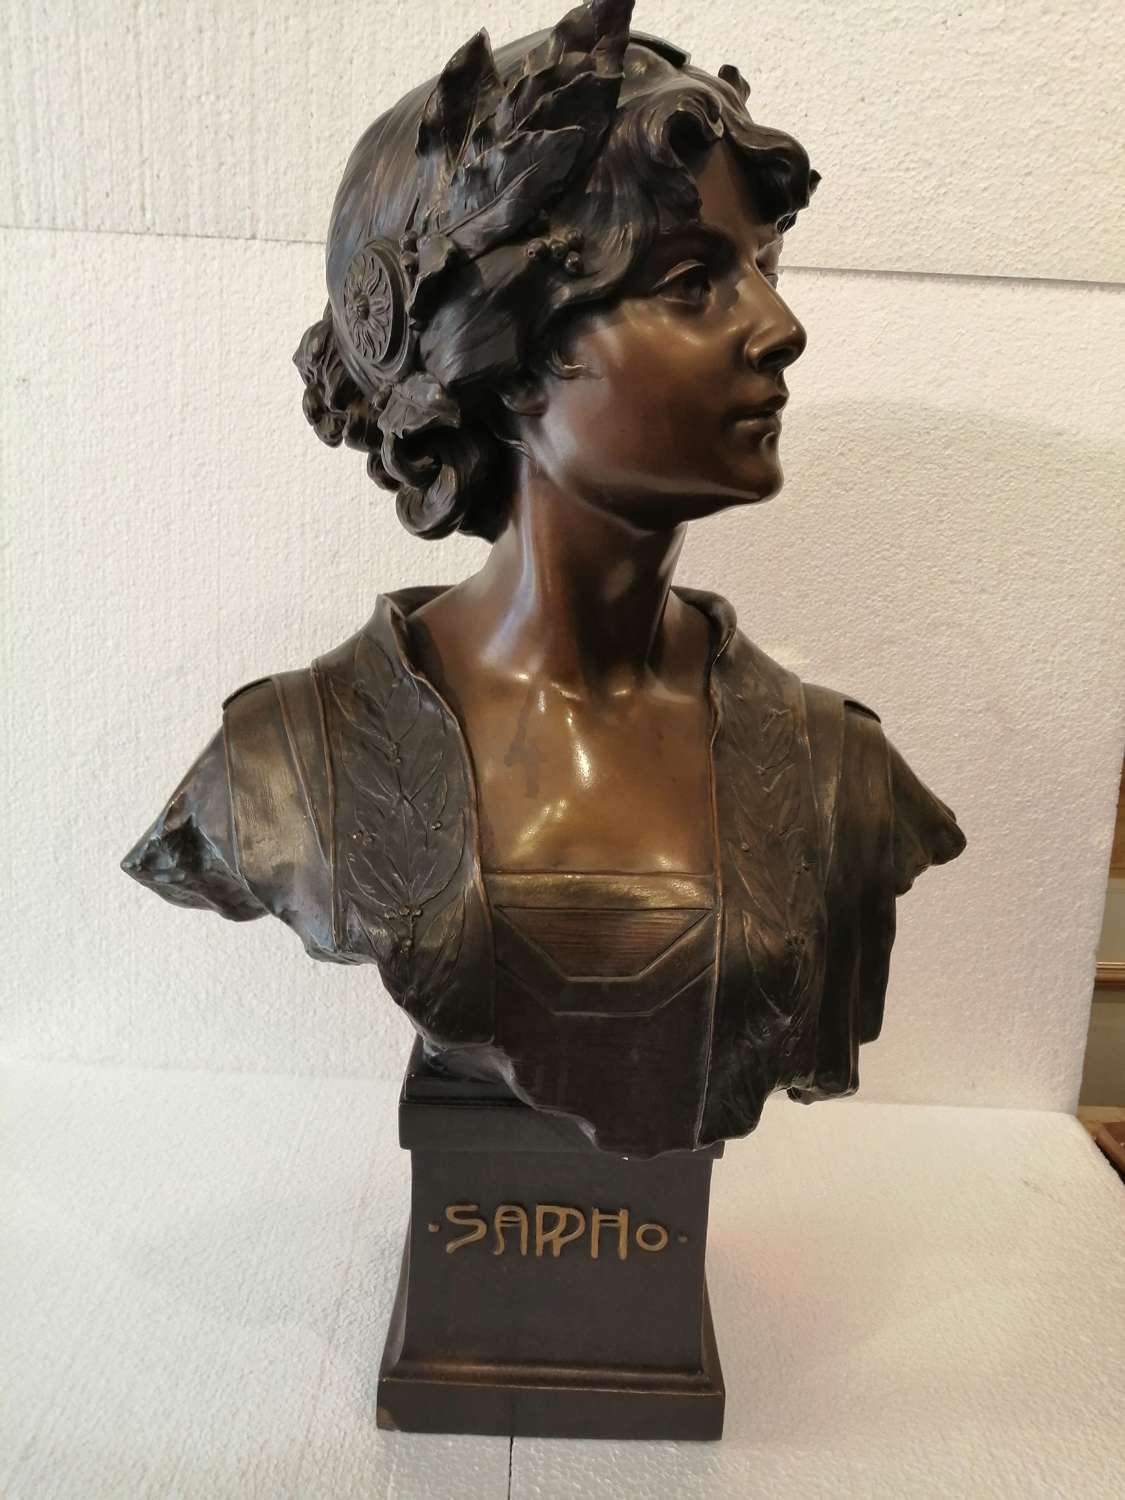 A superb quality plaster bust of Sappho